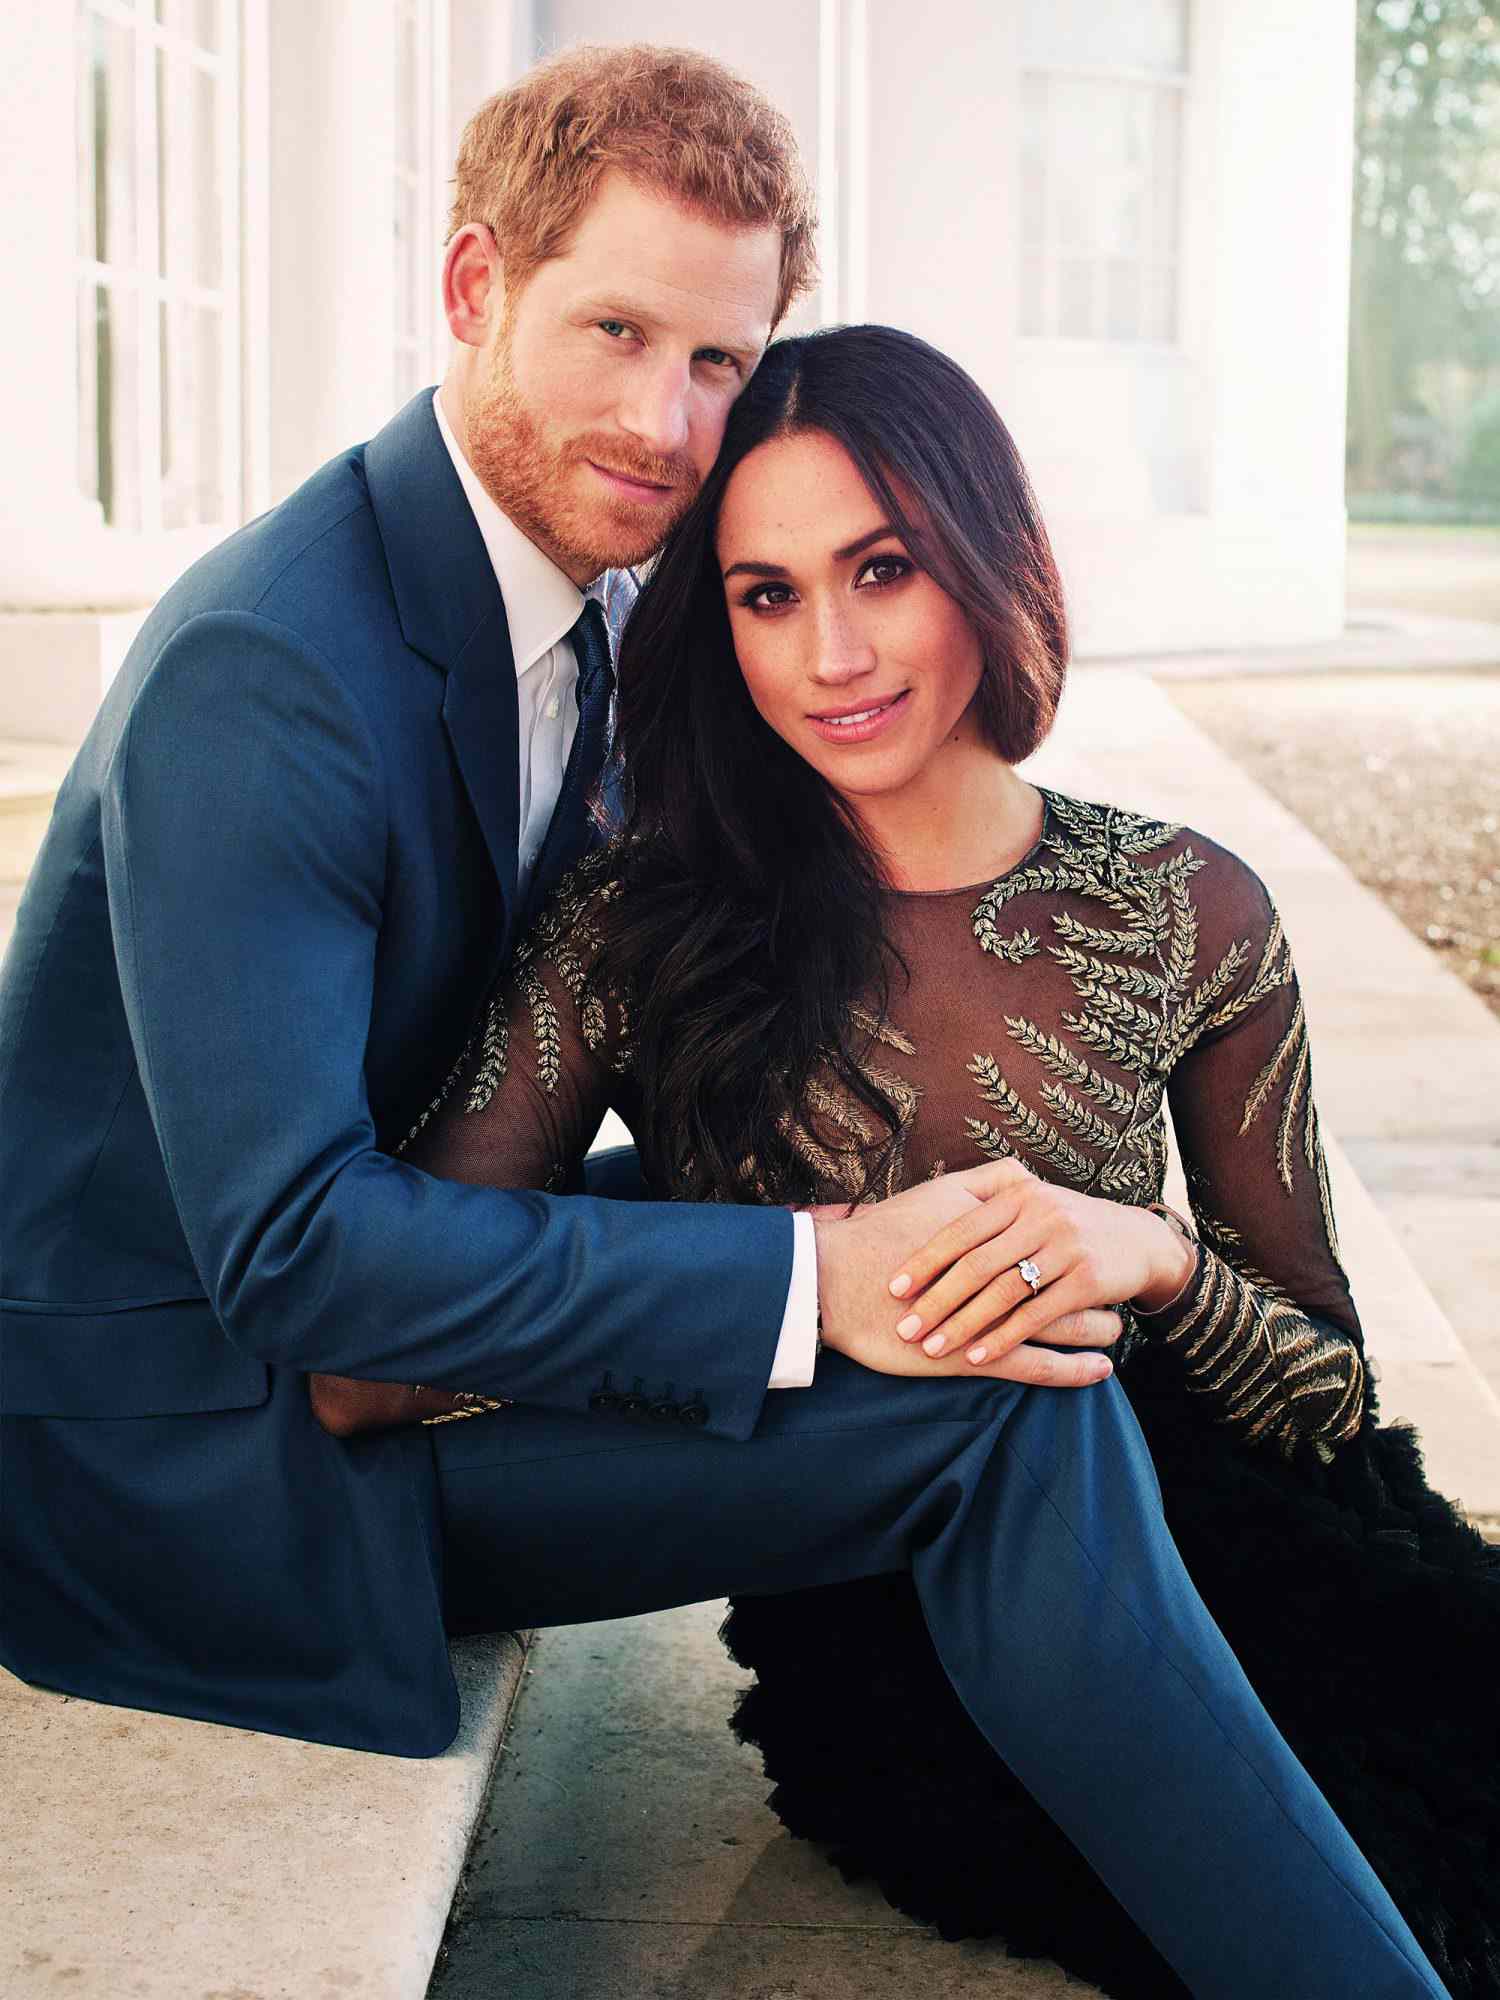 Prince Harry and Meghan Markle official engagement photos, Frogmore House, Windsor, UK - 21 Dec 2017